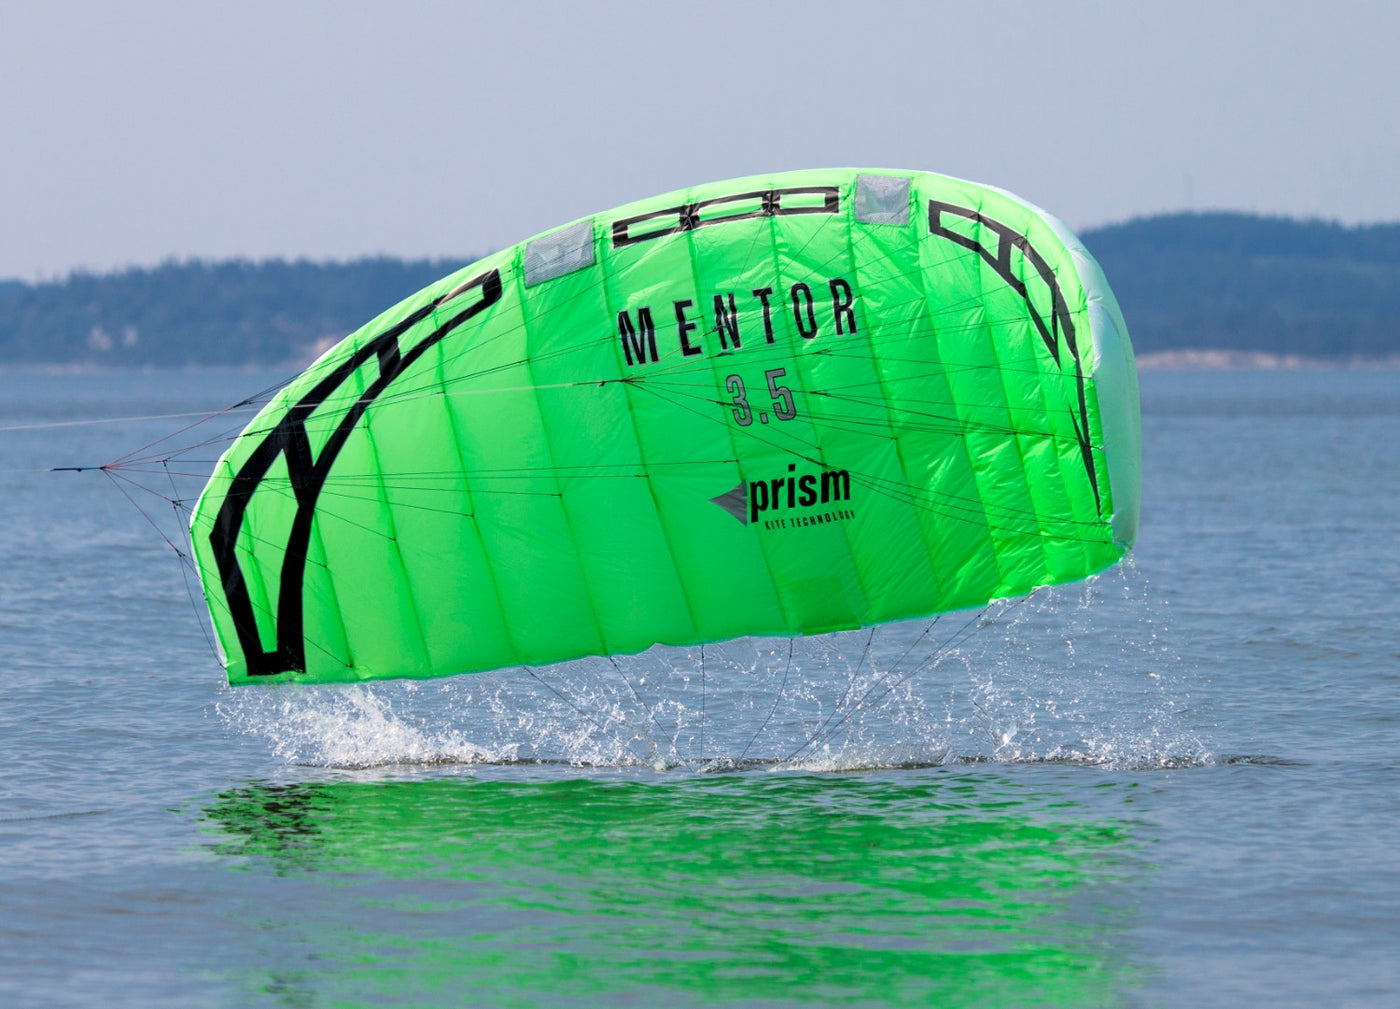 Mentor 3.5 power kite launching from water